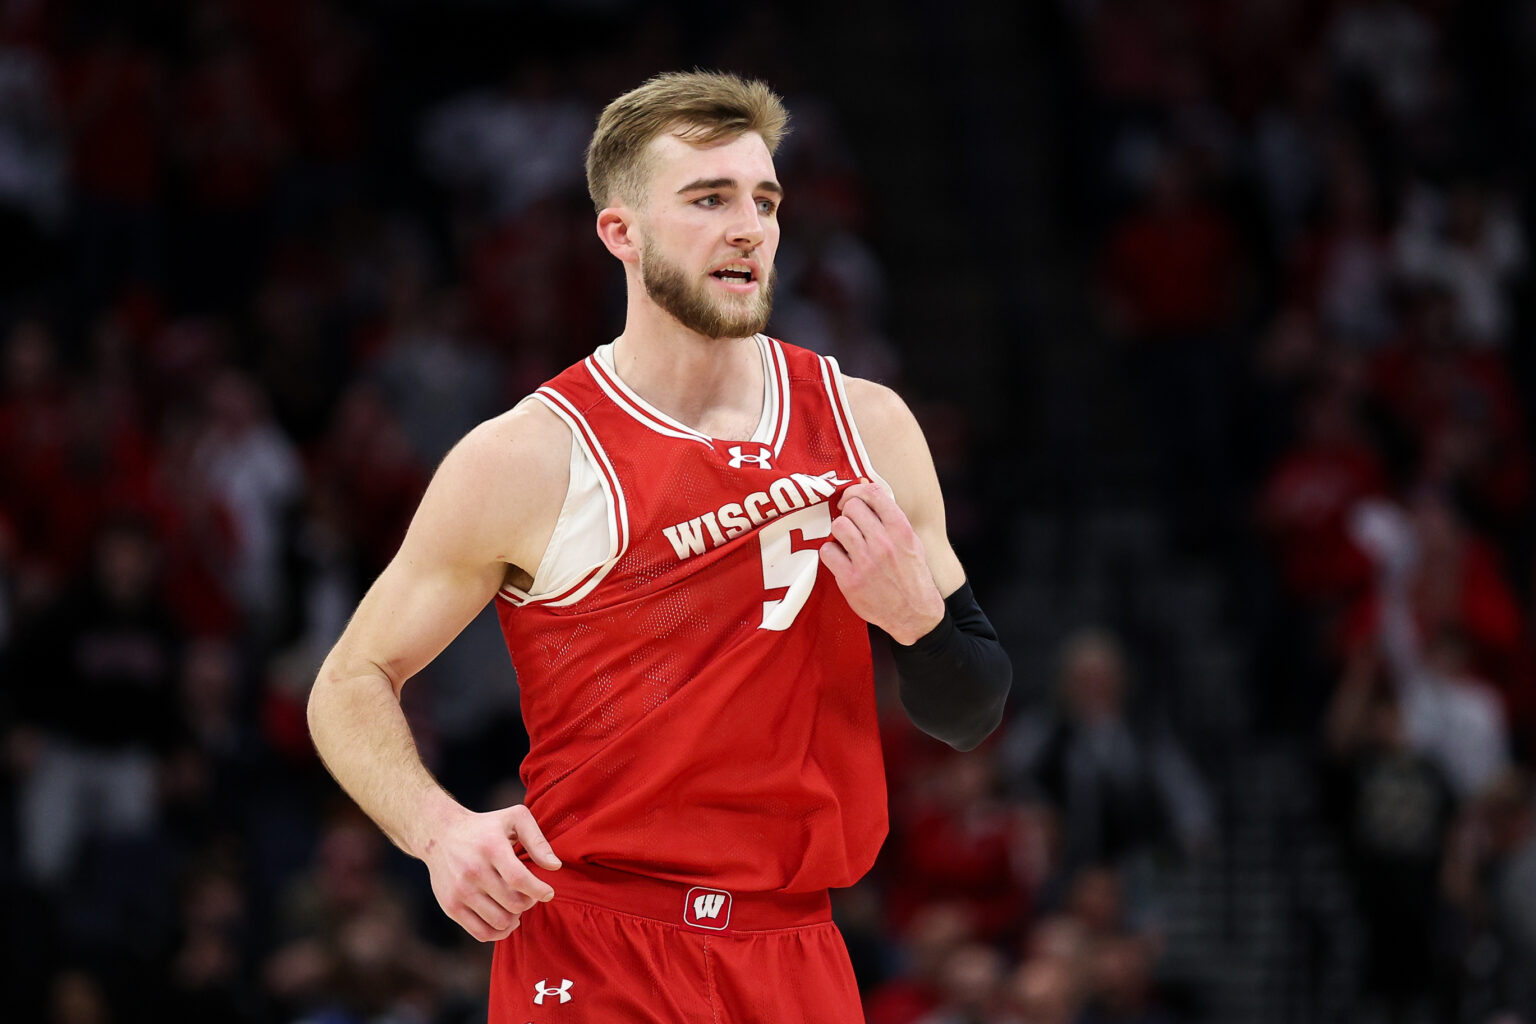 Tyler Wahl suffered an injury, furthering the Wisconsin Badgers health woes.